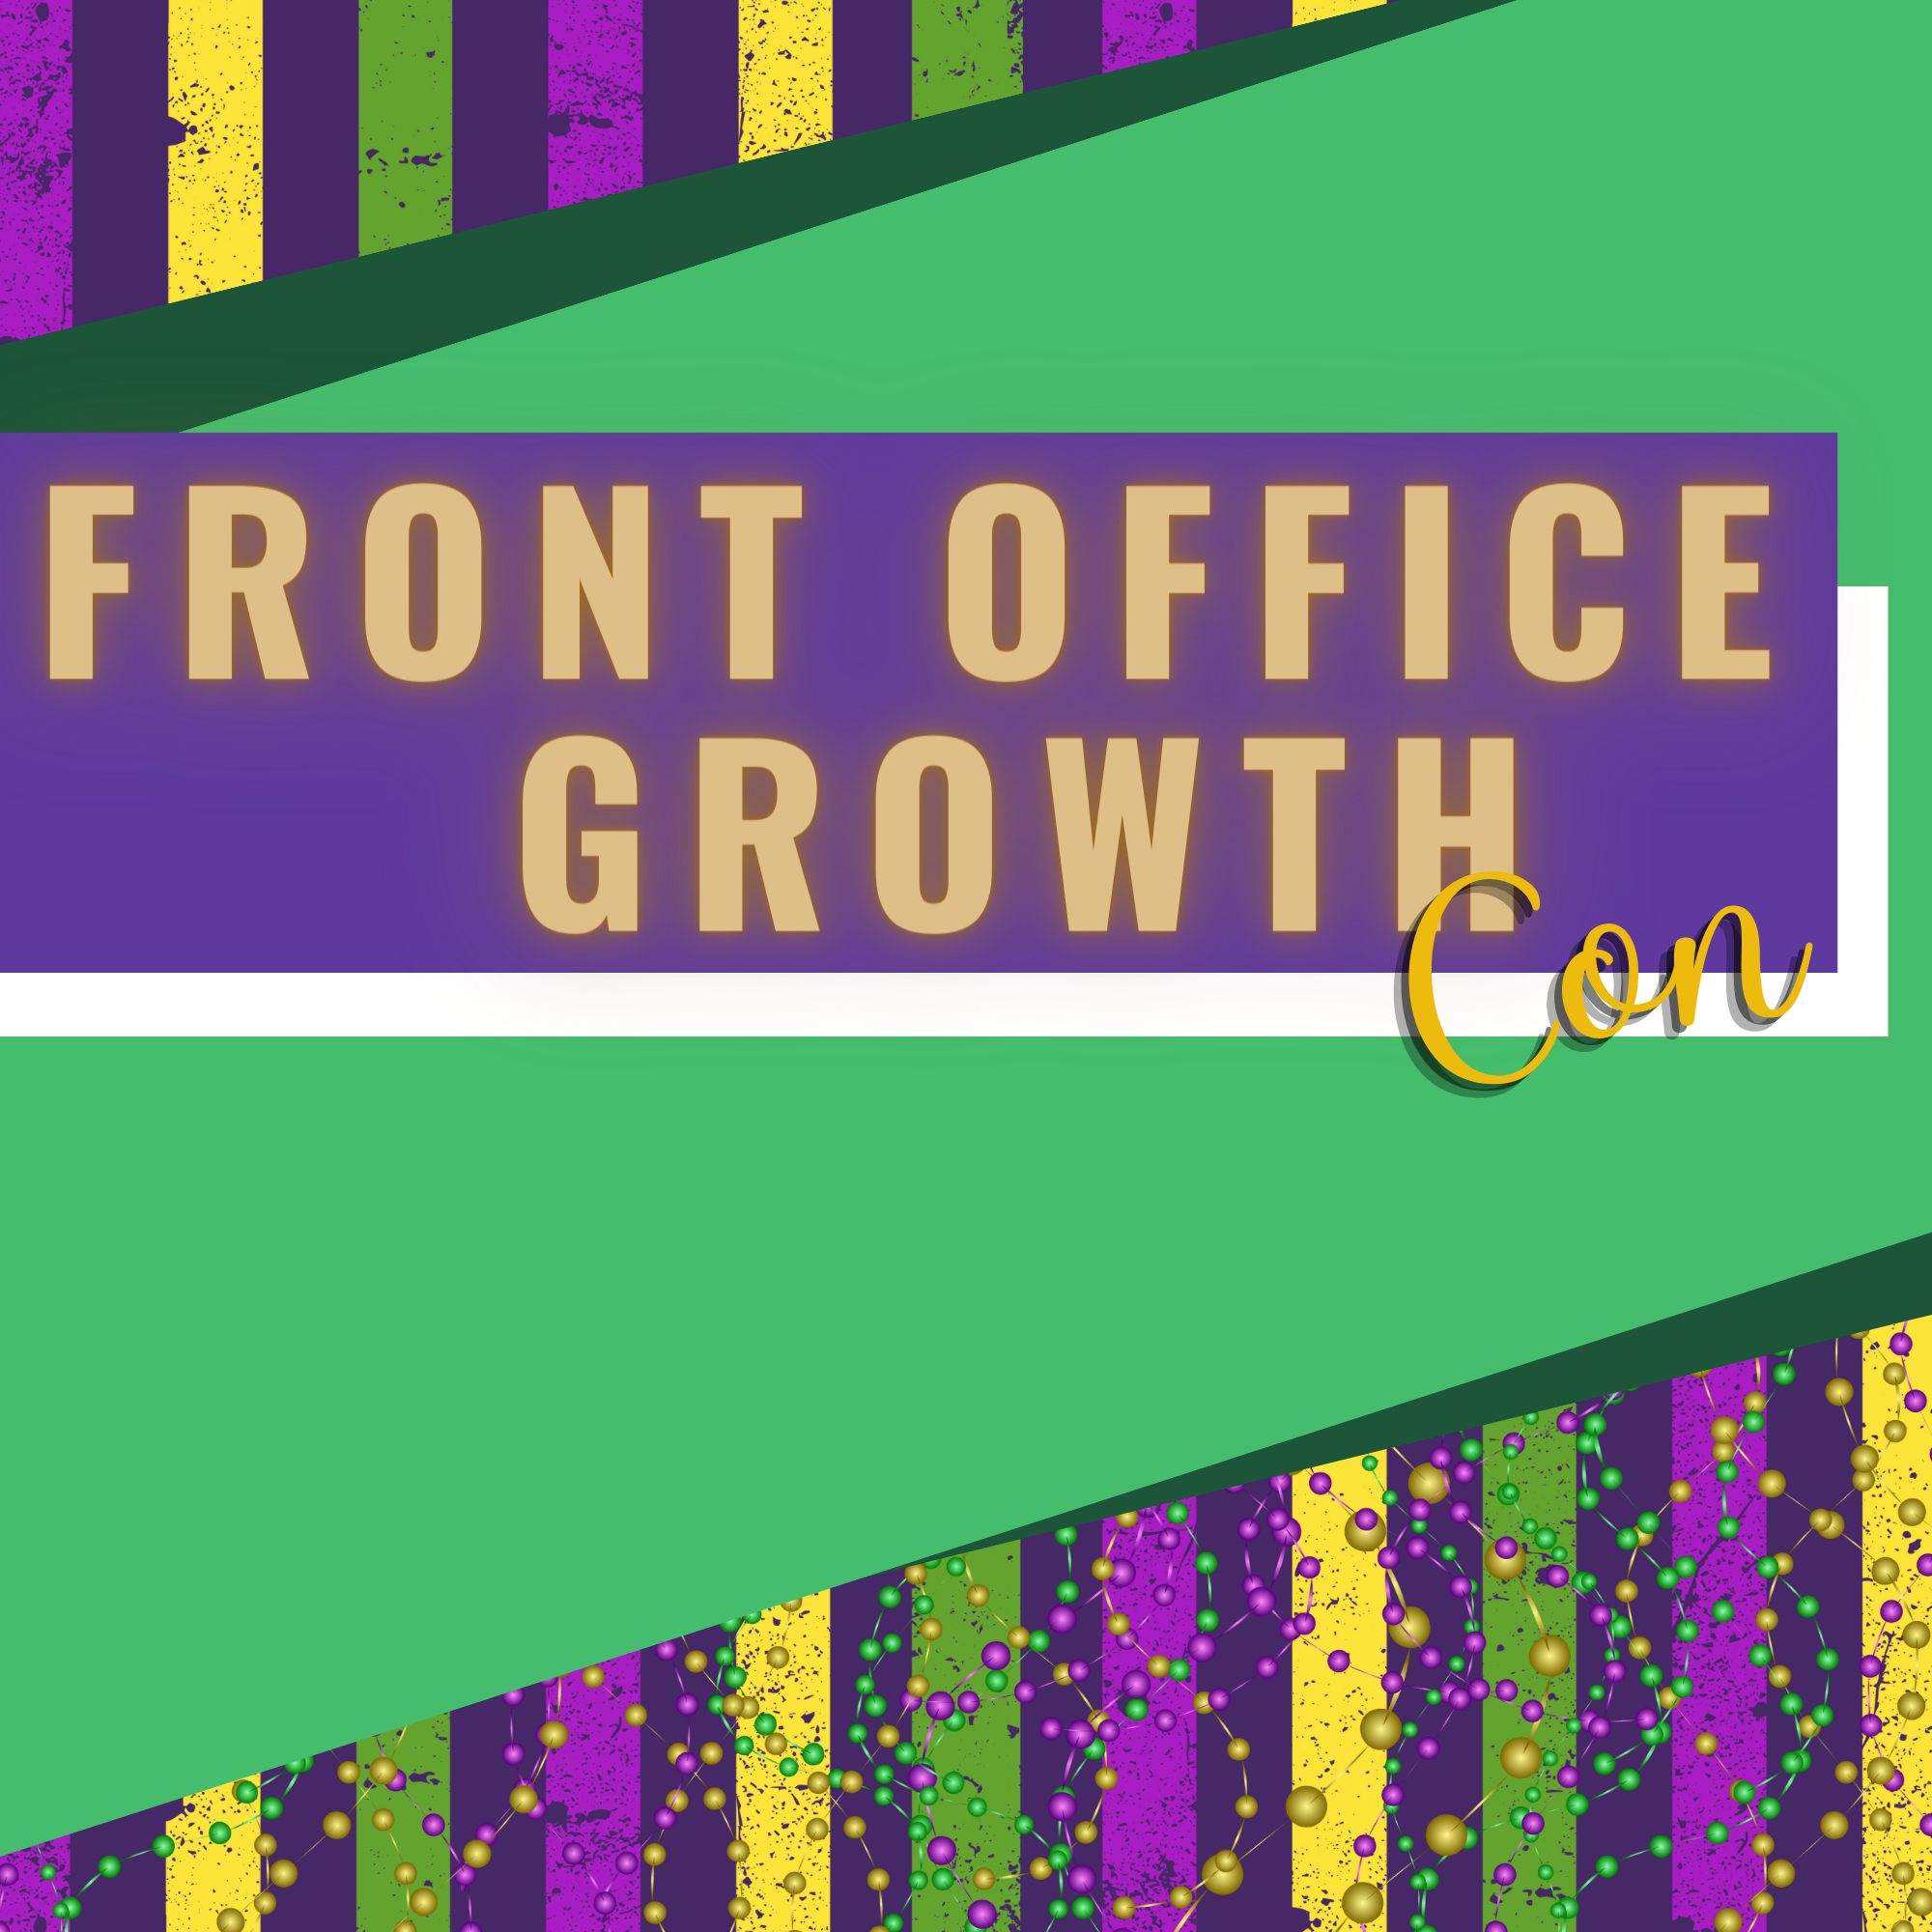 Ninth conference - The front office growth | Learn fun presenting treatment & tricks